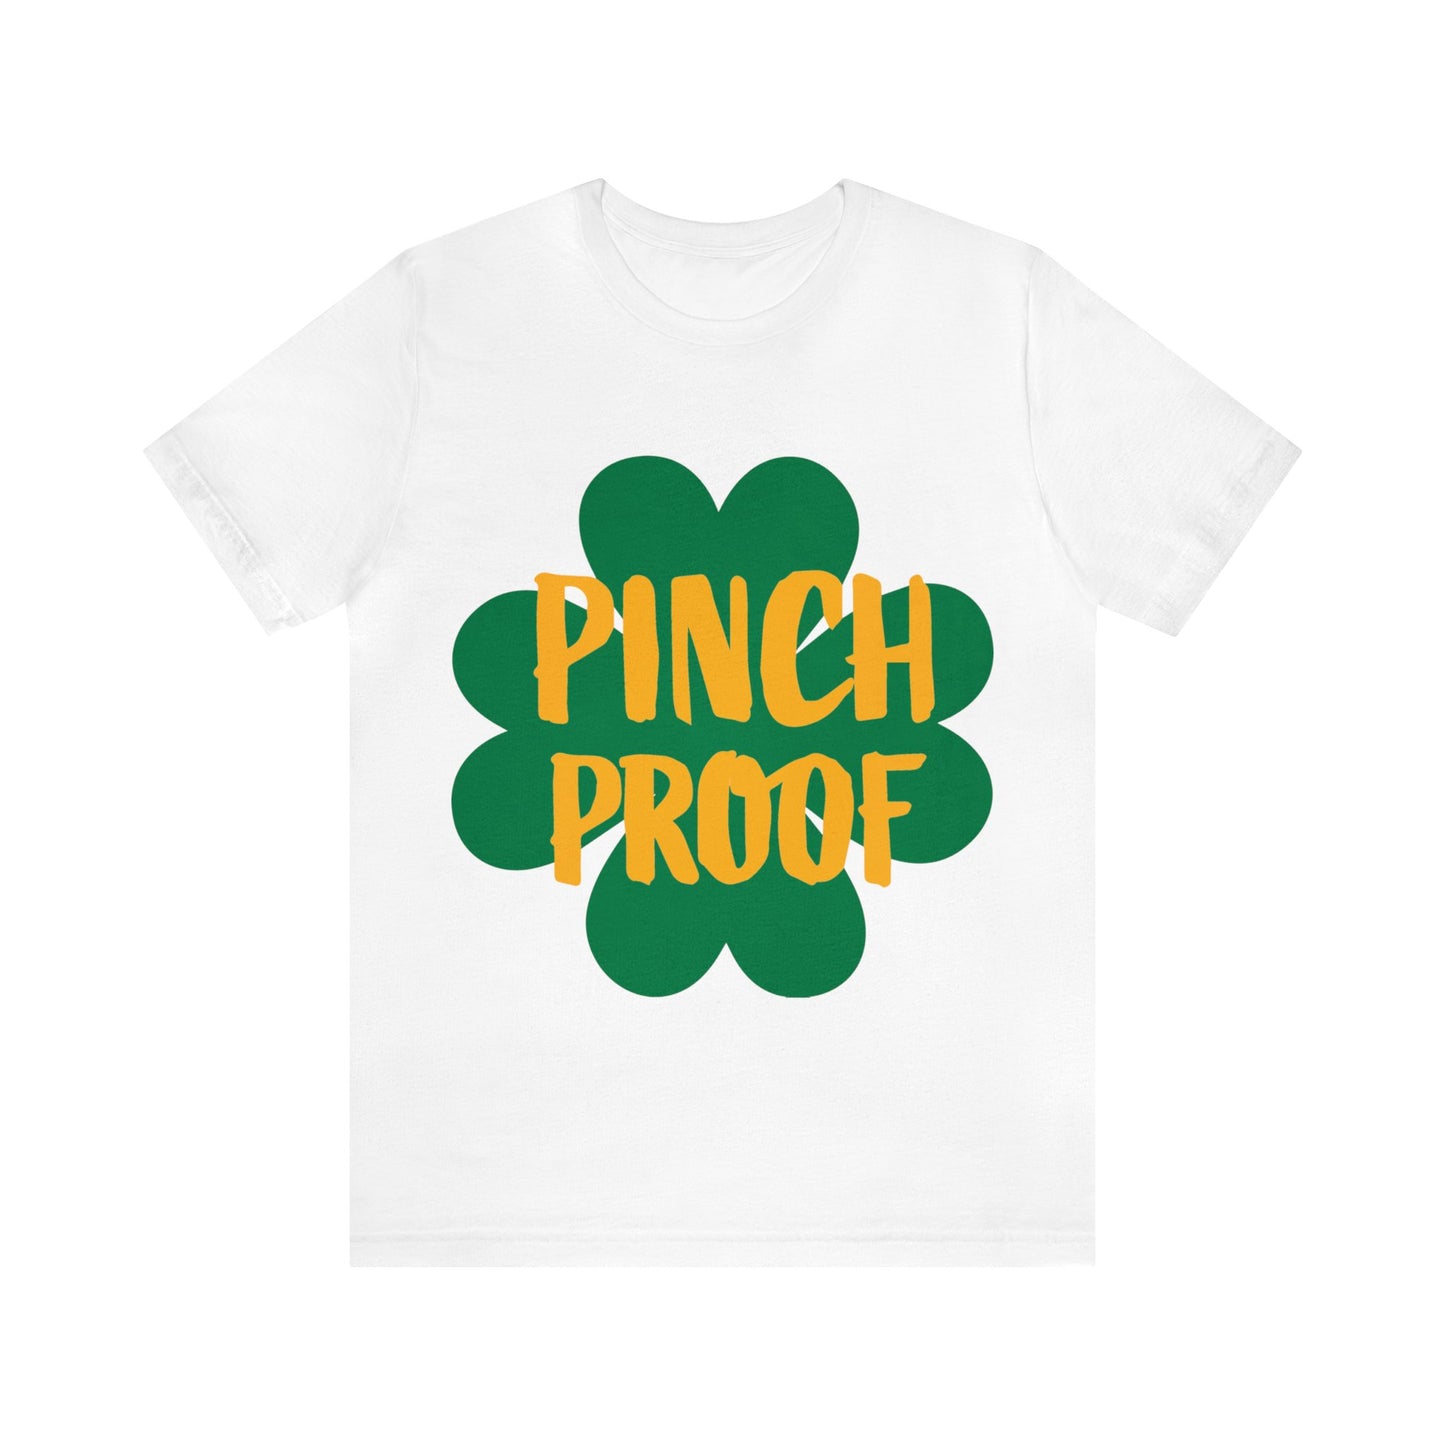 St. Patricks Day "Pinch Proof" T Shirt, Funny St. Patricks Day shirt, St. Pattys Day Funny shirt